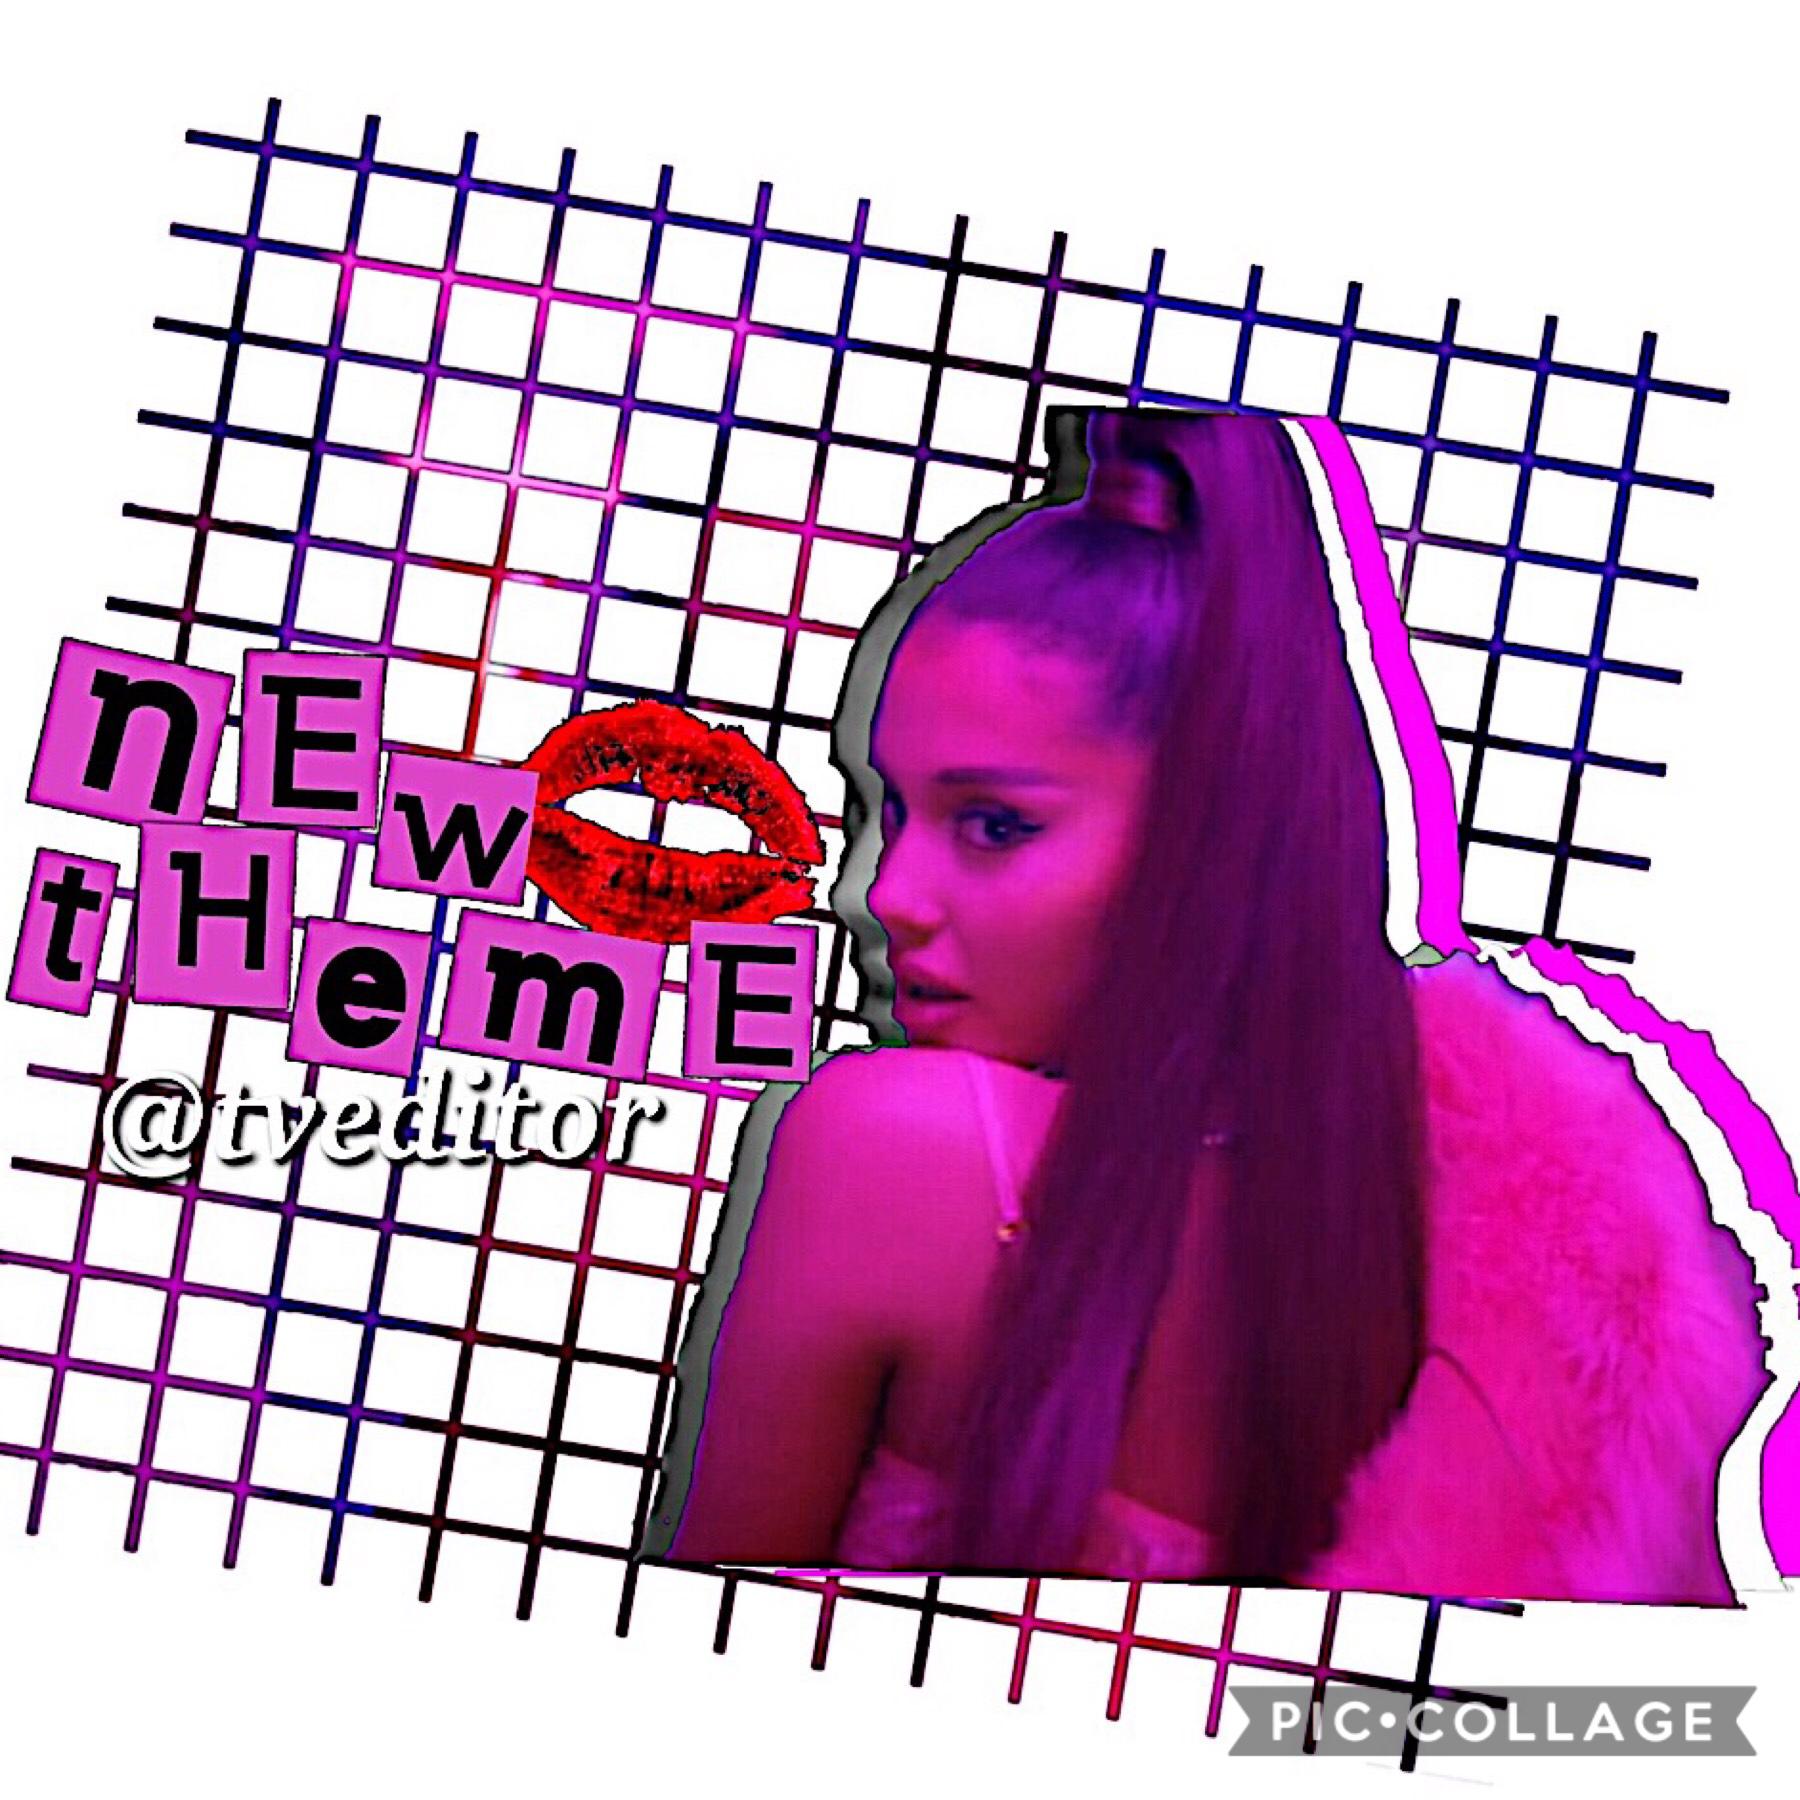 guess who’s back💗 creds to the overlay I used for the new theme! I miss you guys all <3  I’ll try to be active xx 💋 I love 7 rings y’all 😍😍 cya xo